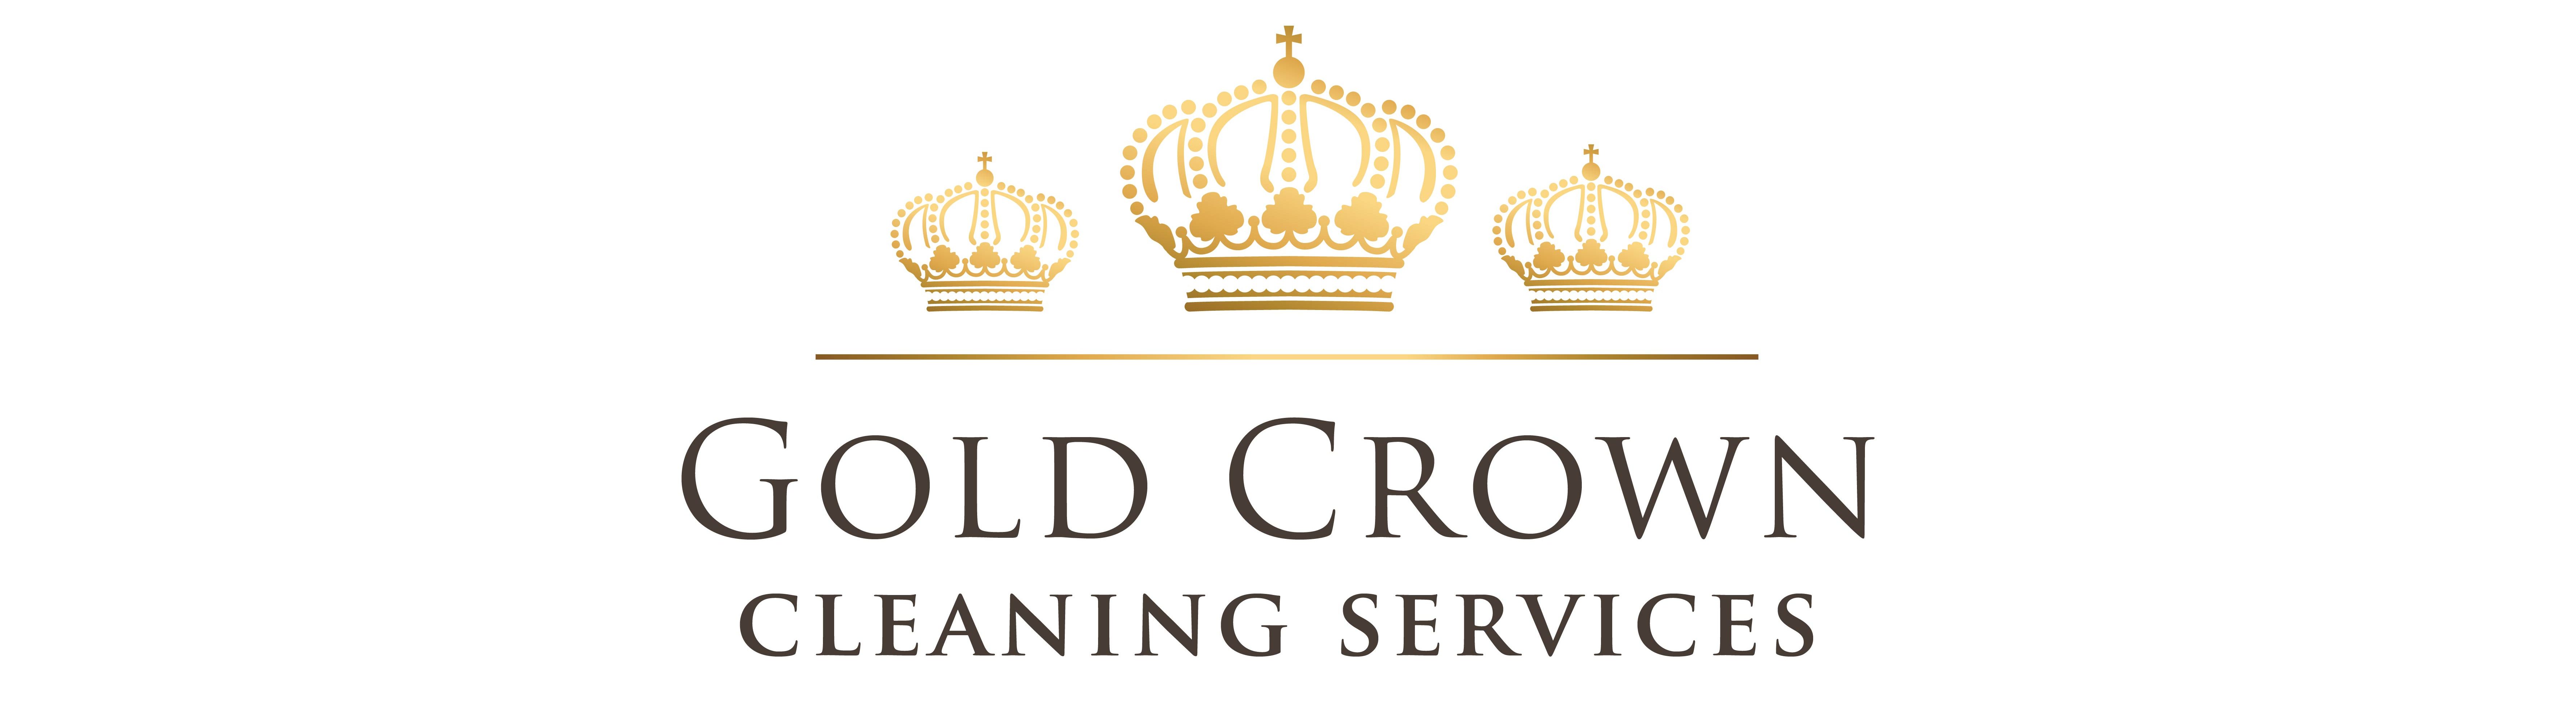 Gold Crown Cleaning Services